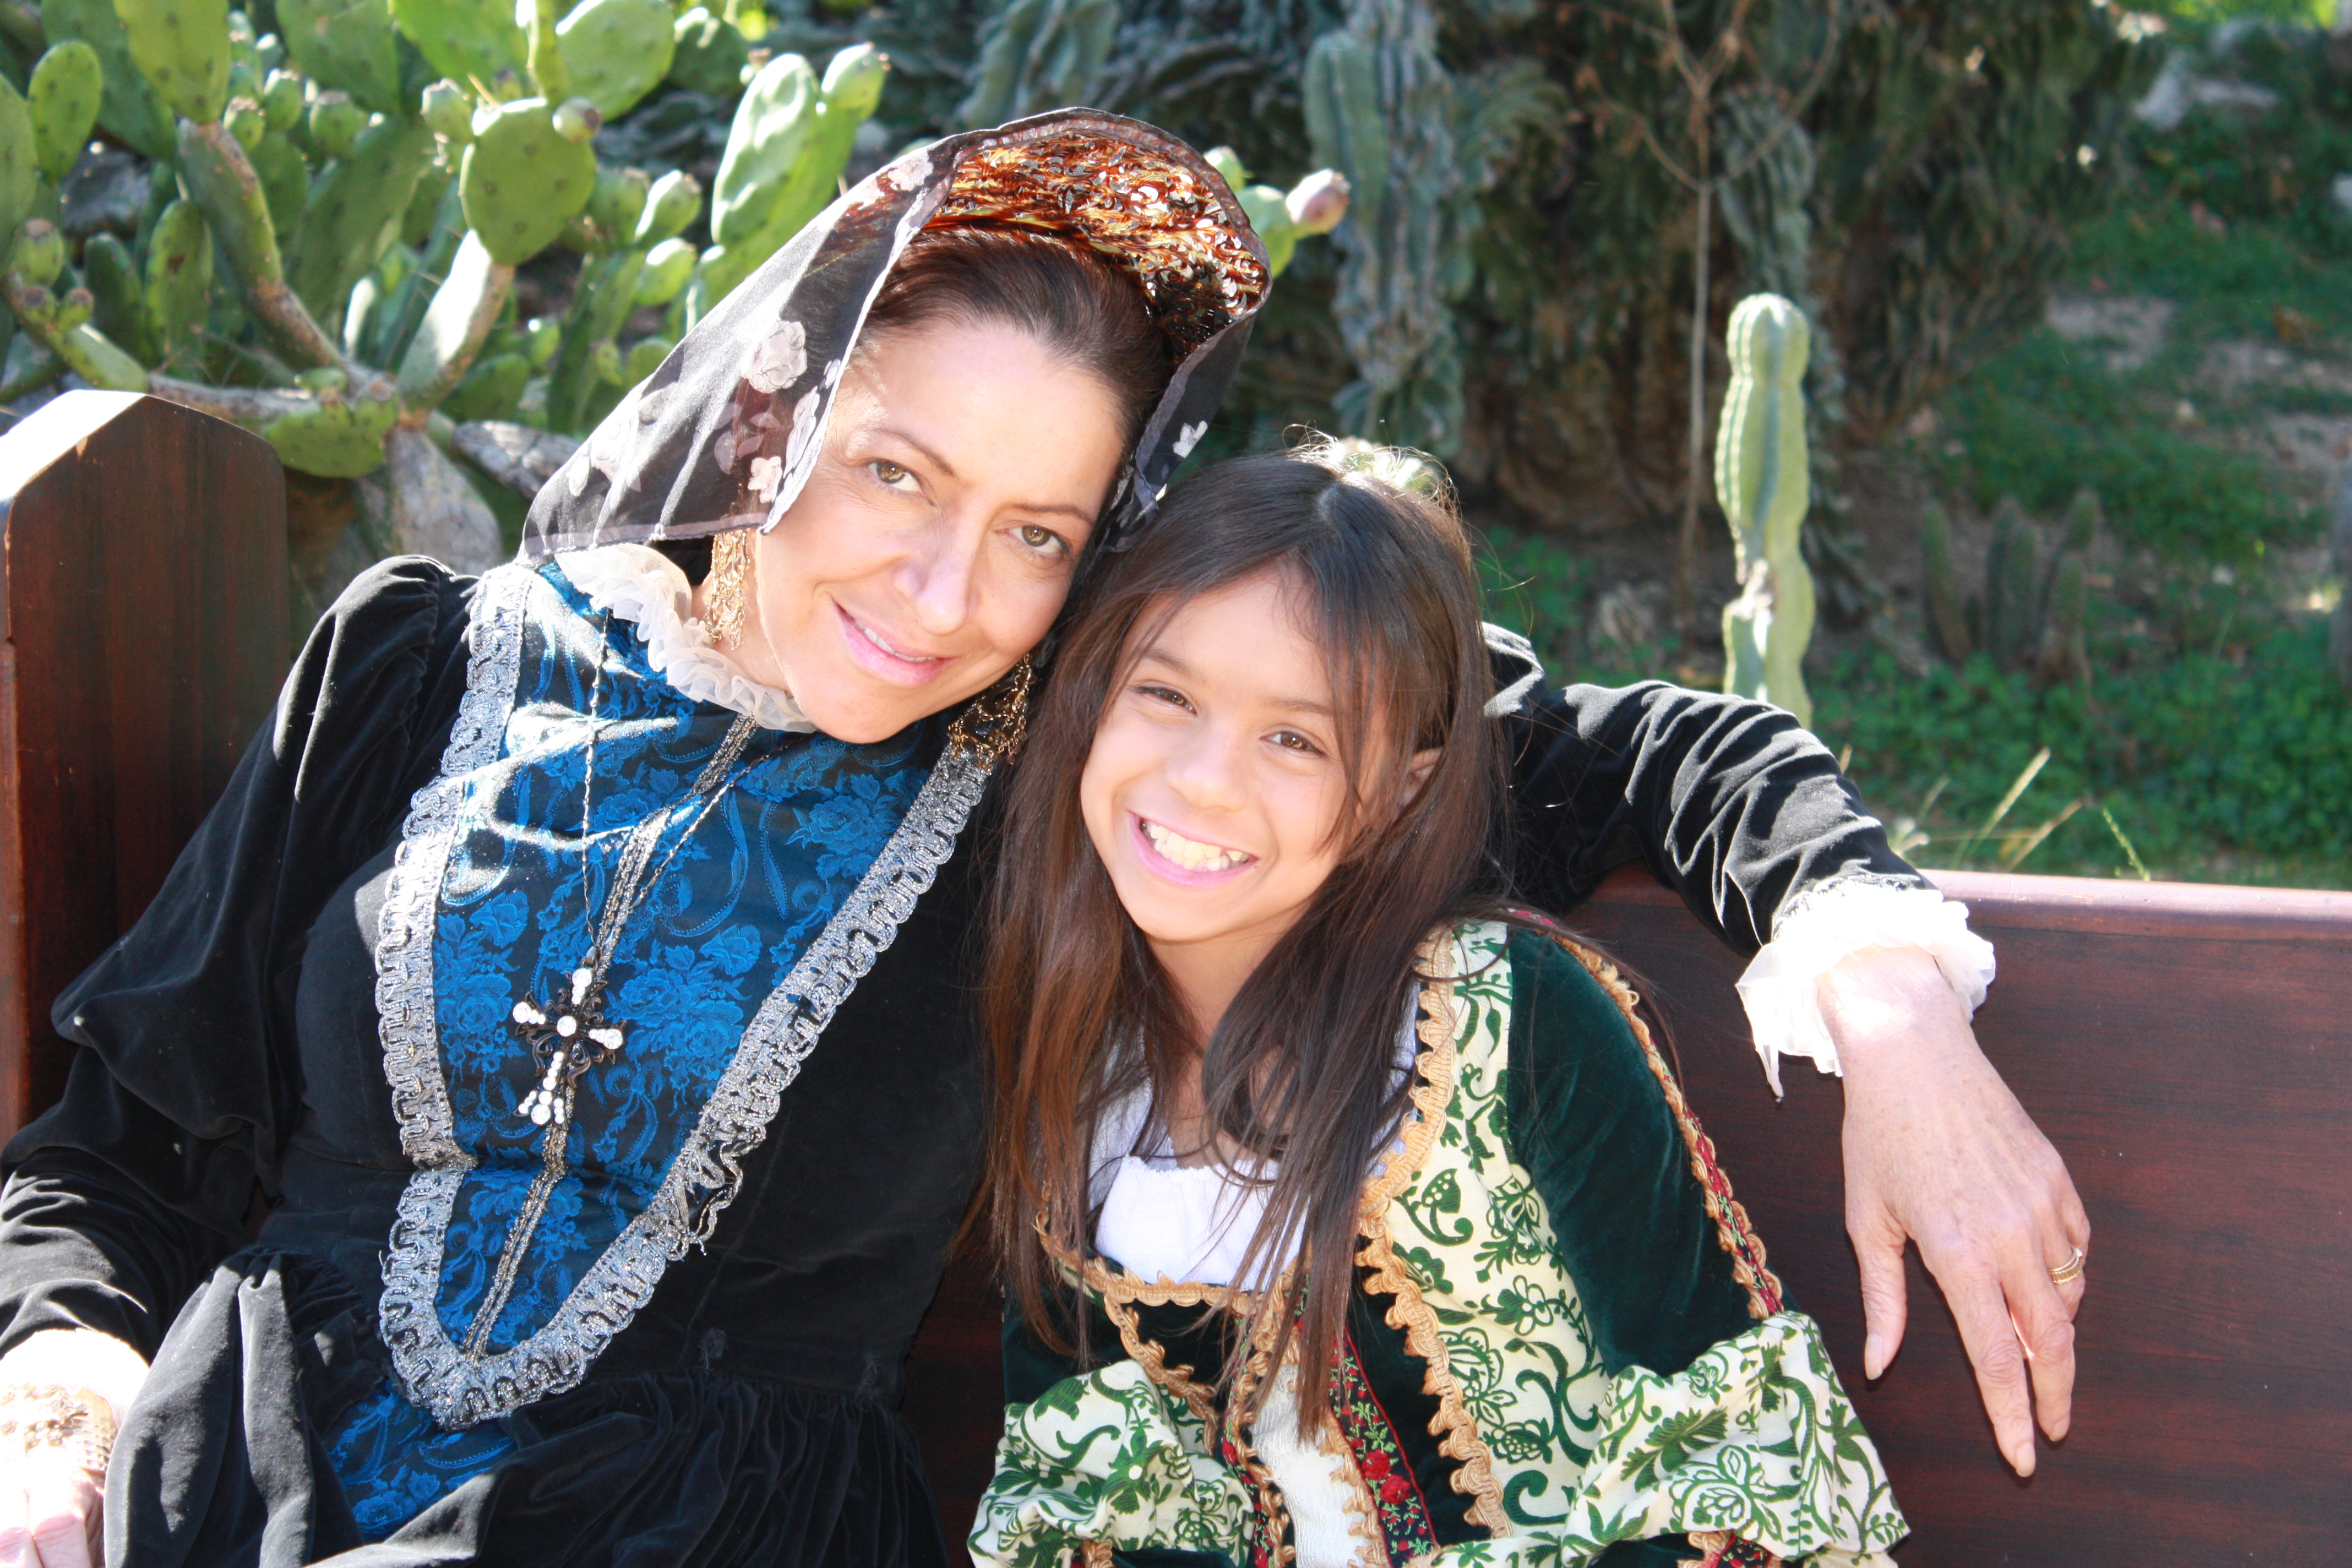 Maile on set of the Exquisite Tenderness of Santa Rosa de Lima